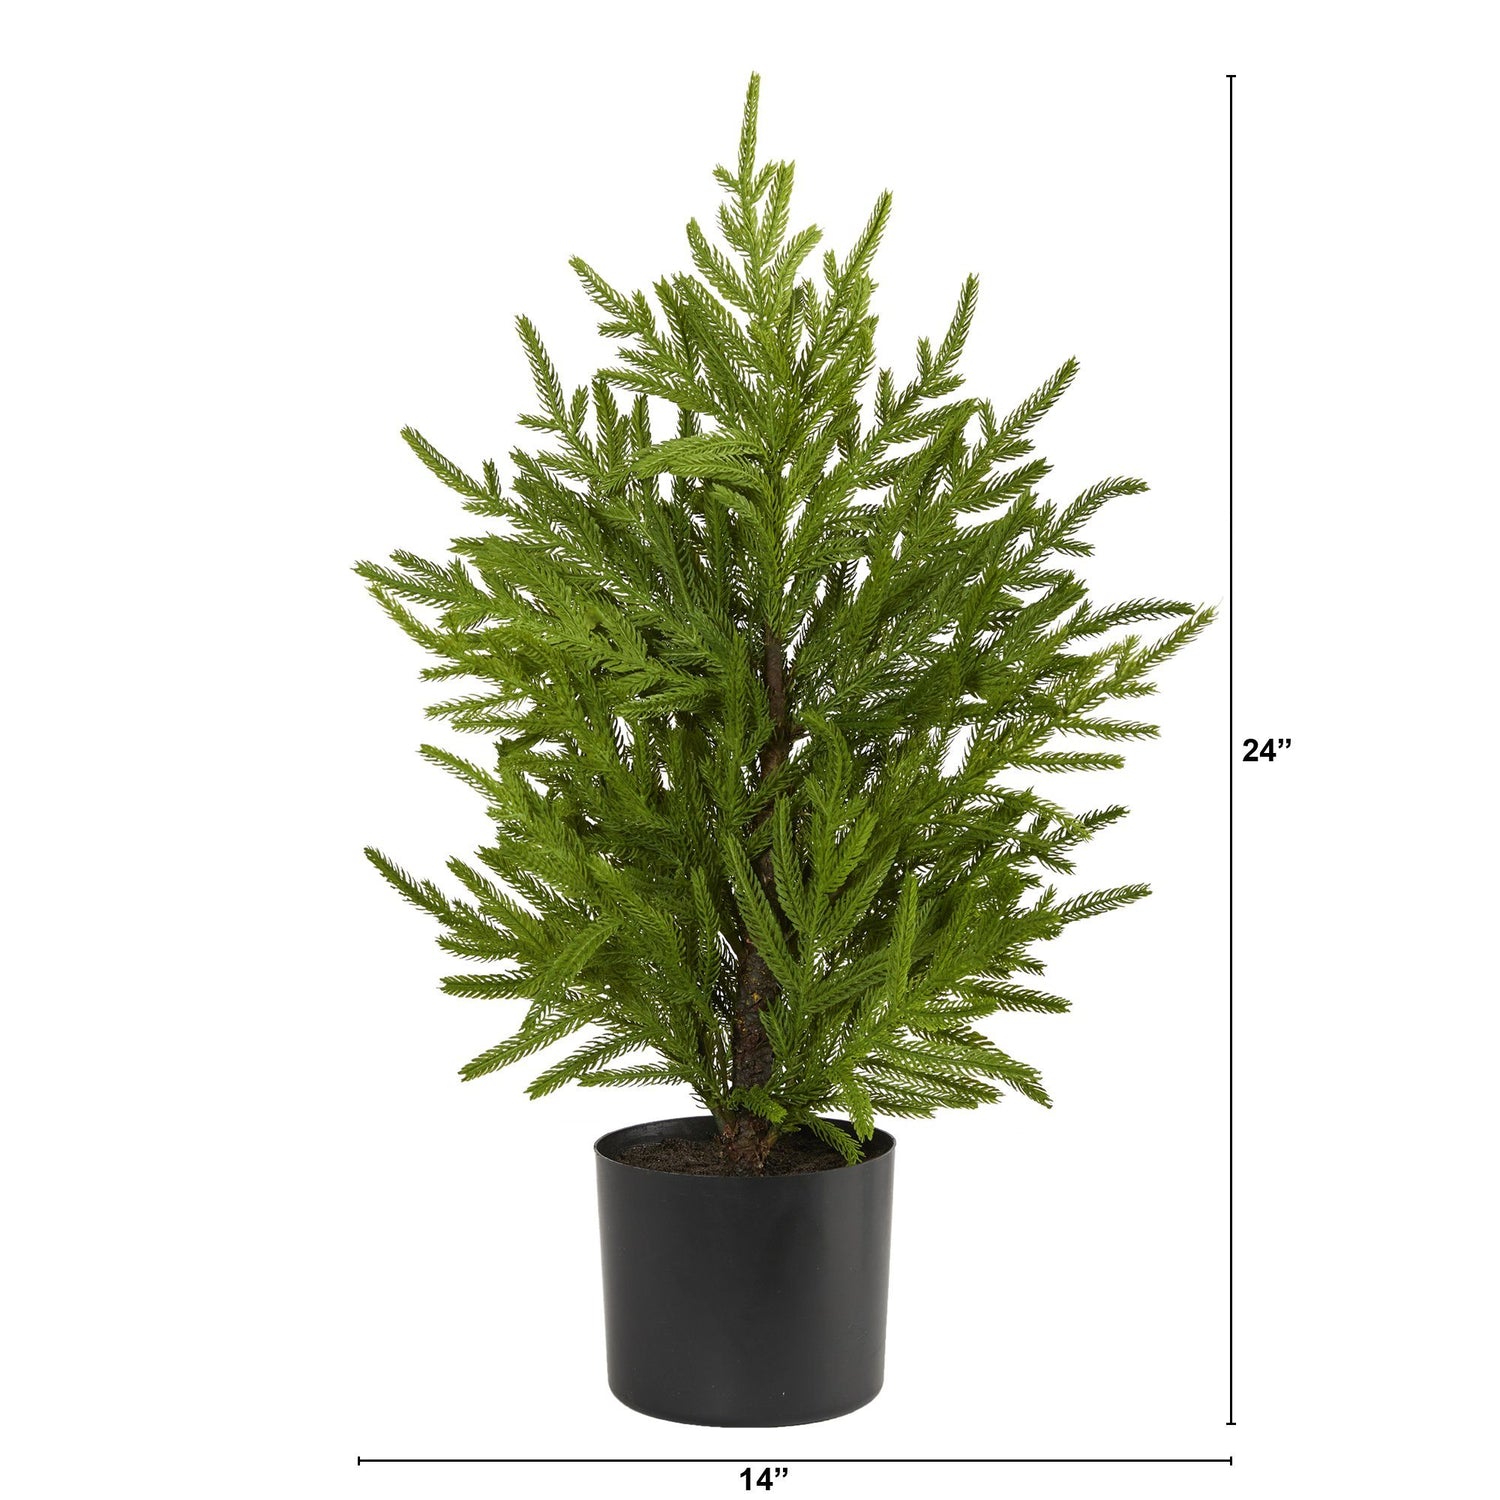 2’ Norfolk Island Pine “Natural Look” Artificial Christmas Tree in Decorative Planter